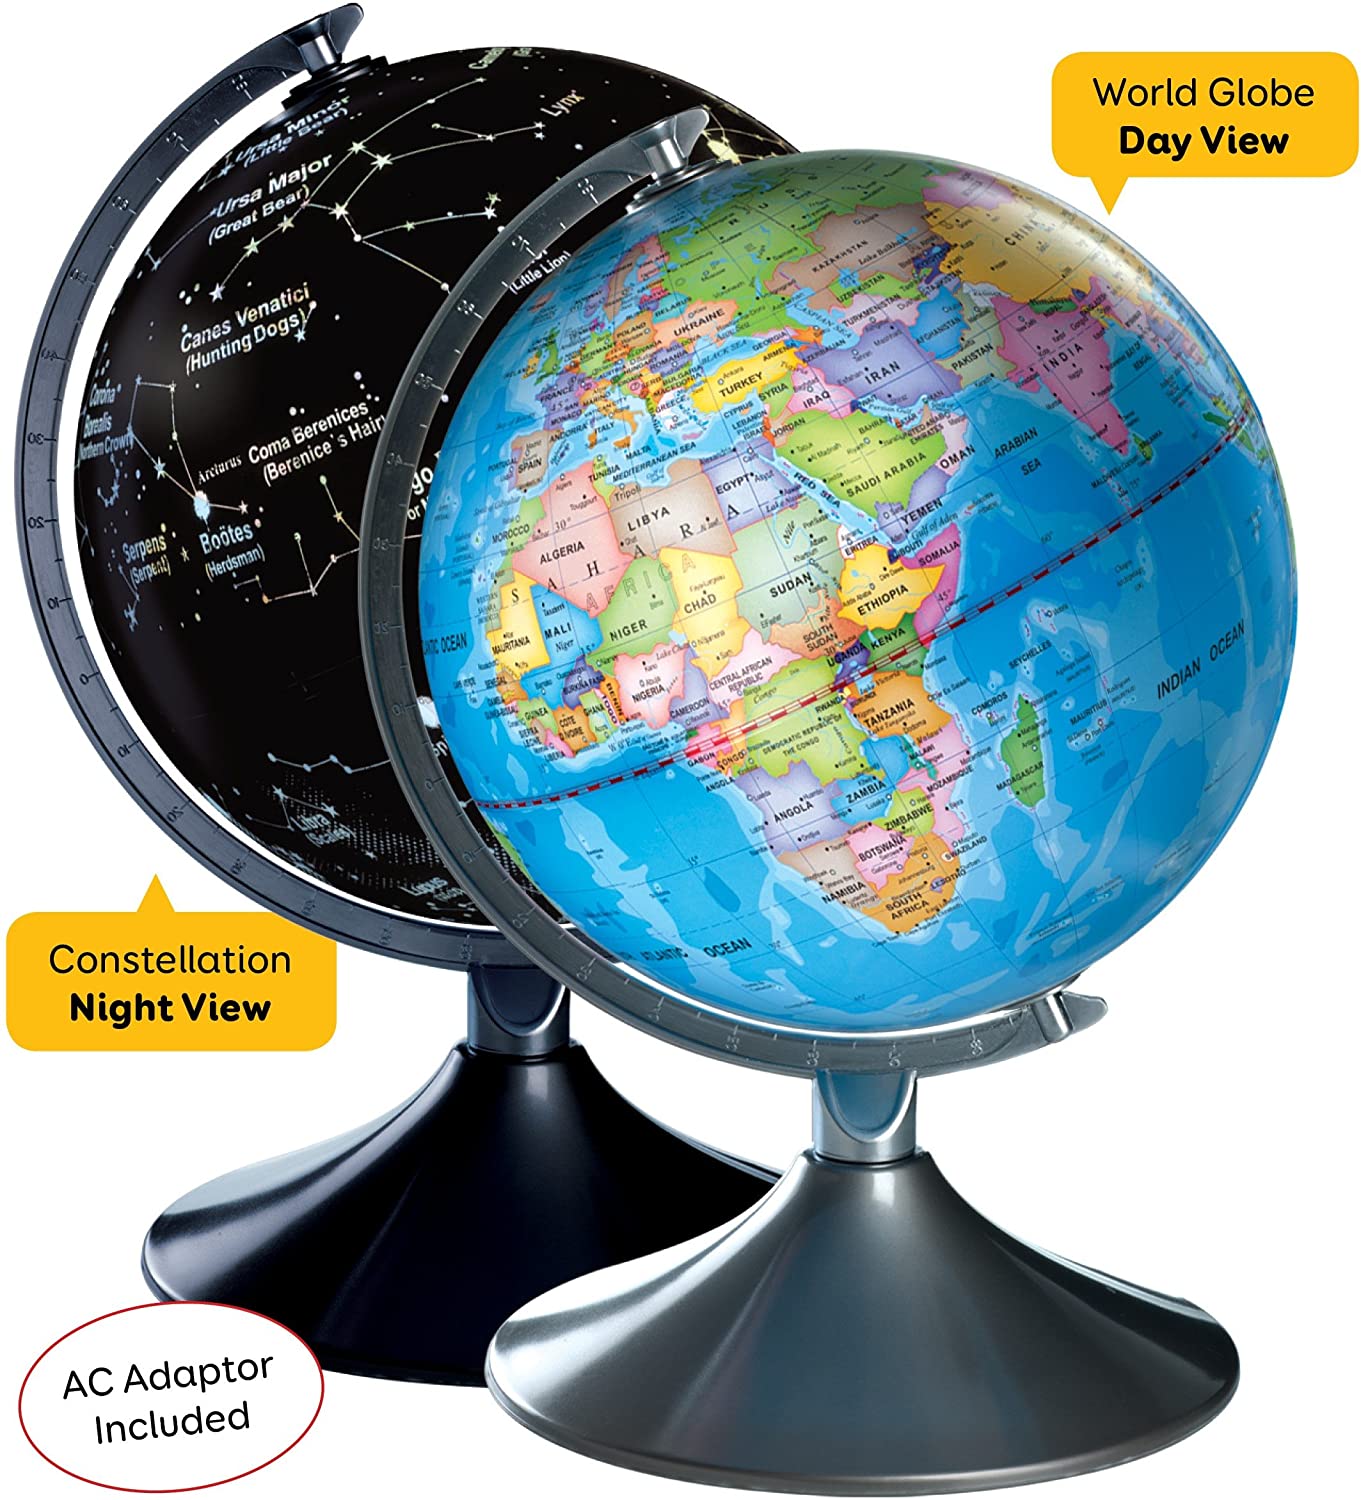 Interactive World Illuminated Globe for Kids - 2-in-1 Standing Political Earth Sphere by Day & Glowing Star Constellation Map at Night - AC Adapter Included